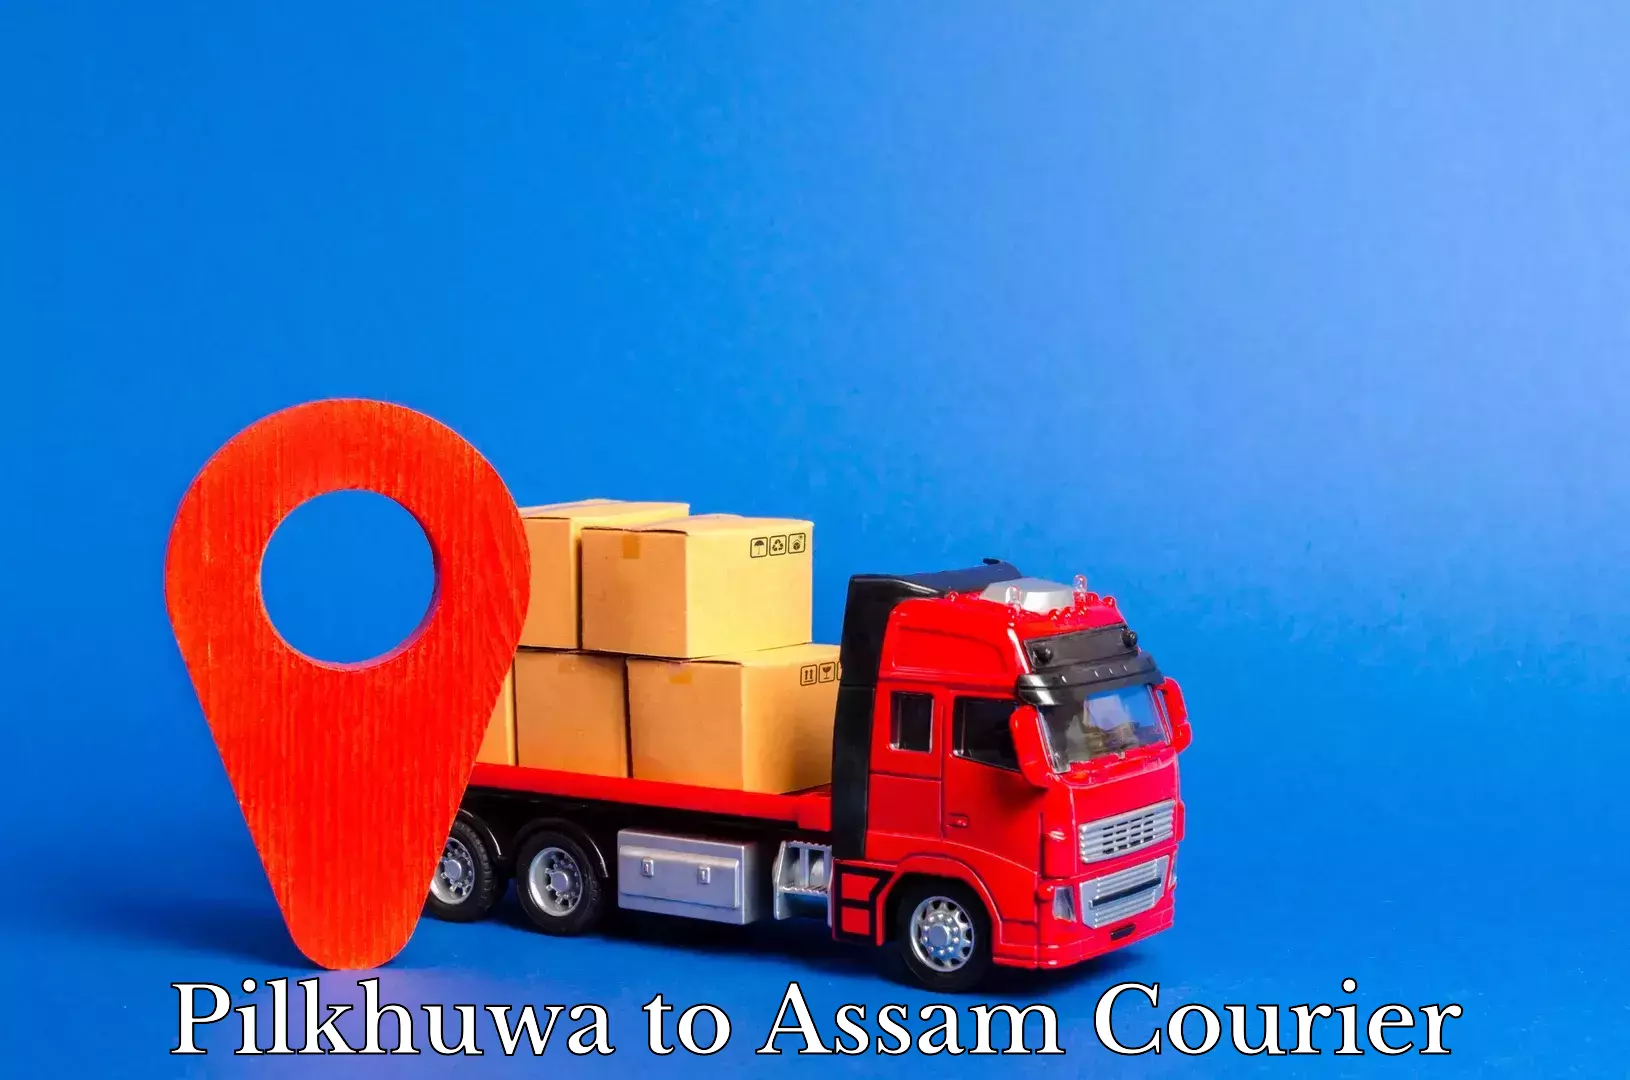 Sustainable shipping practices in Pilkhuwa to Assam